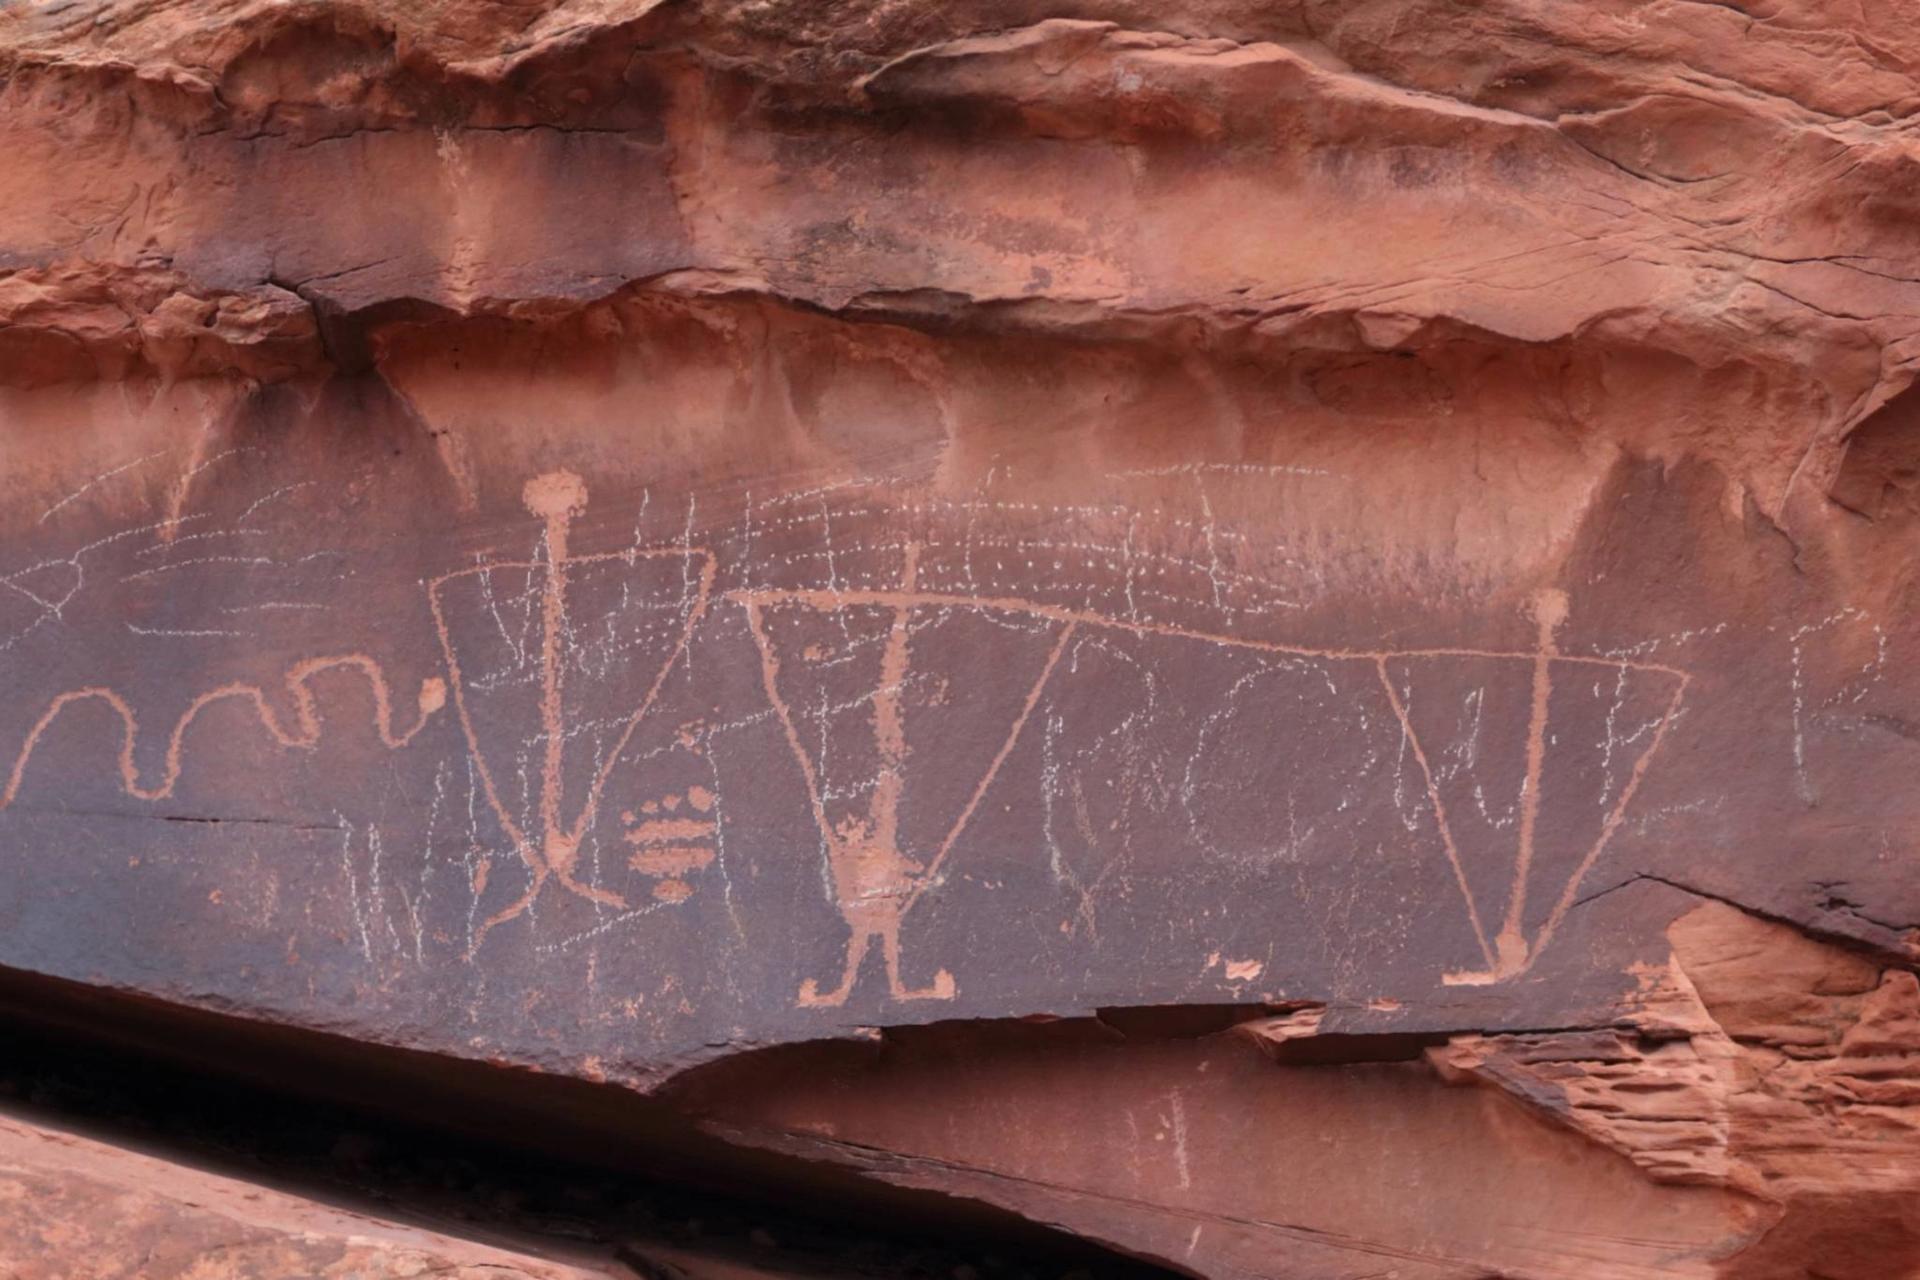 The petroglyph wall known as the Birthing Rock was vandalised with several obscenities Jody Patterson